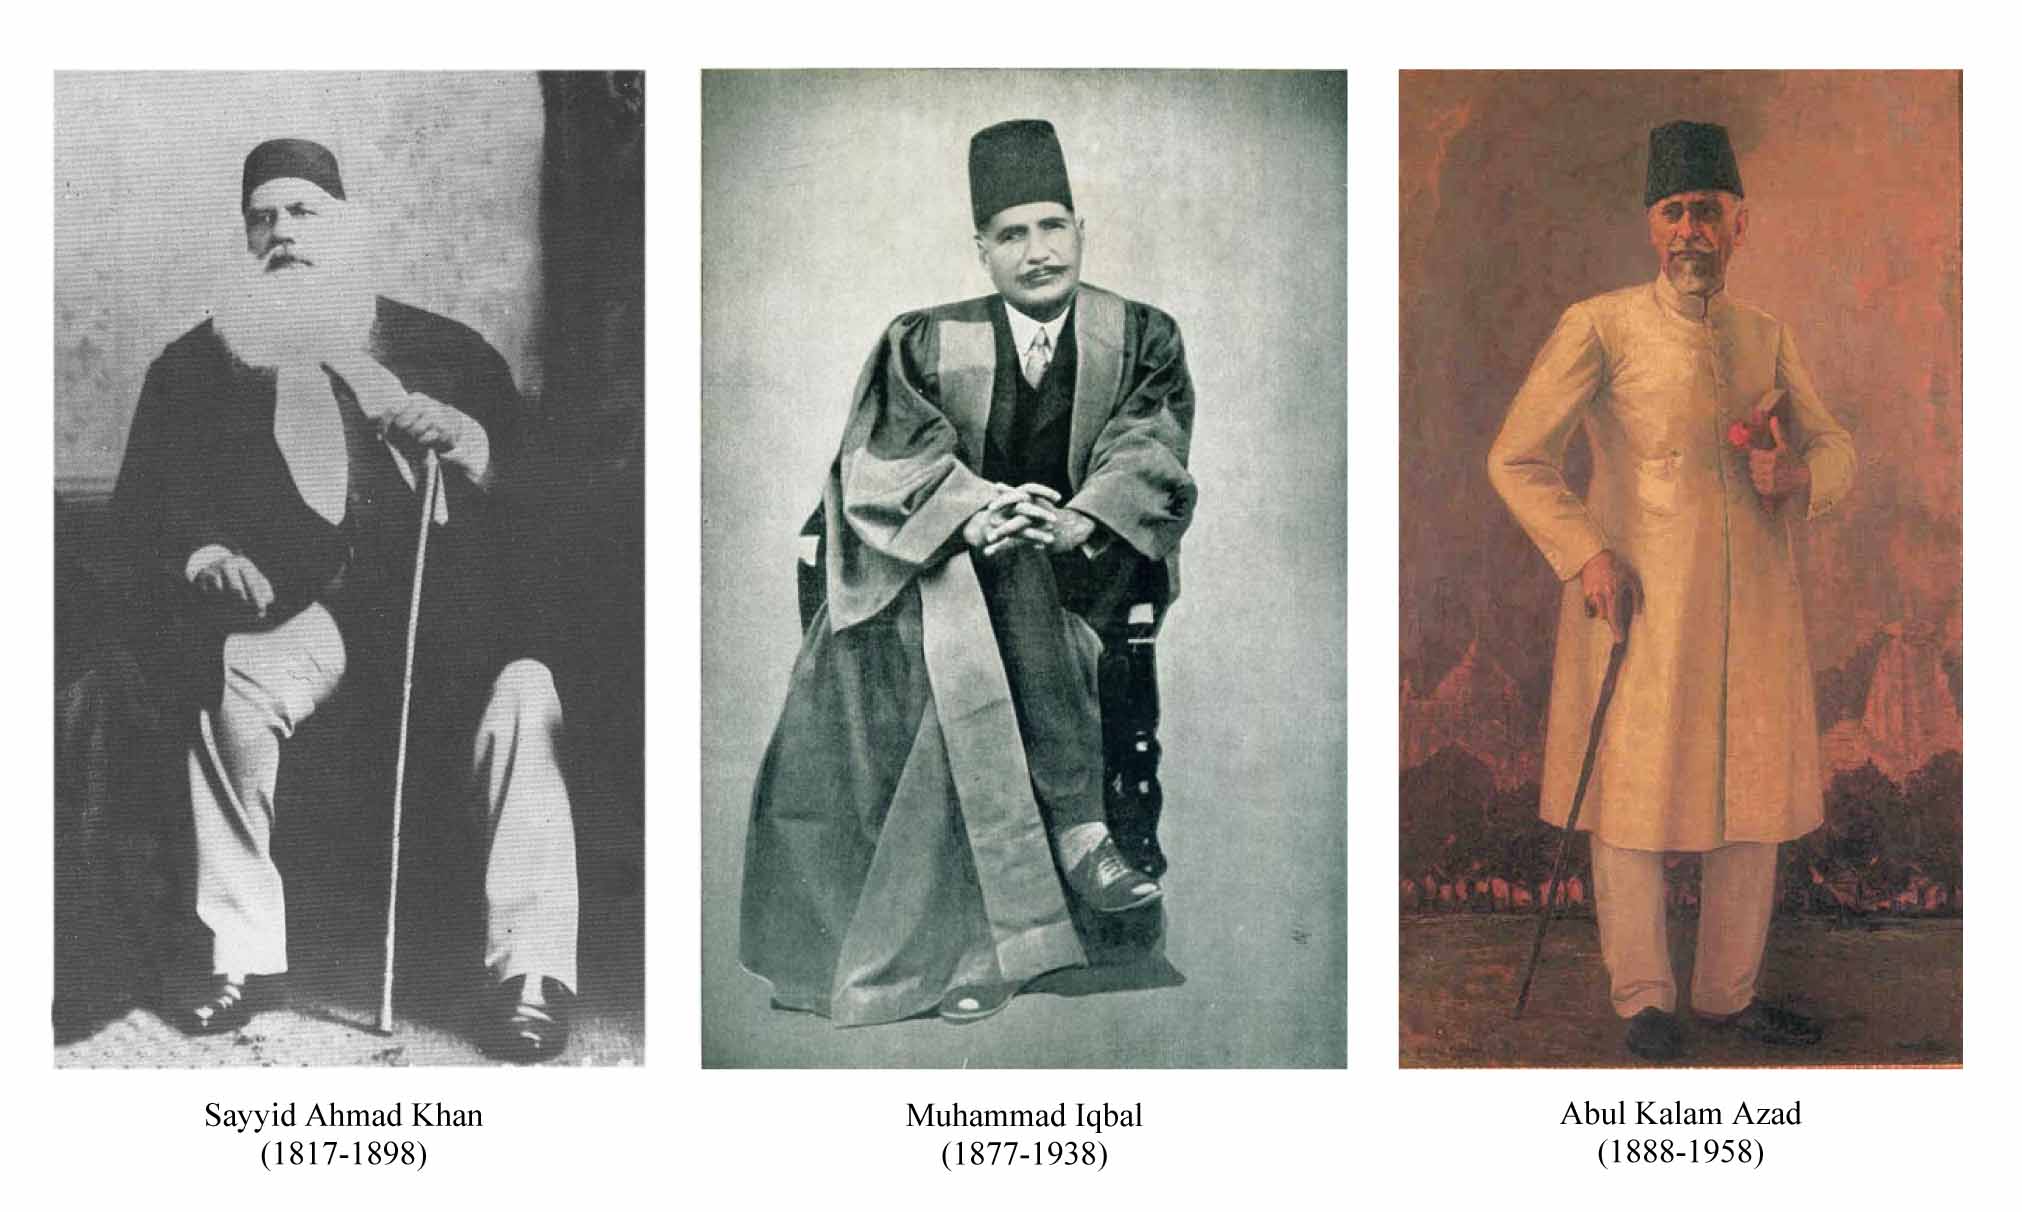 Muslim Figures and Modernity in Colonial India